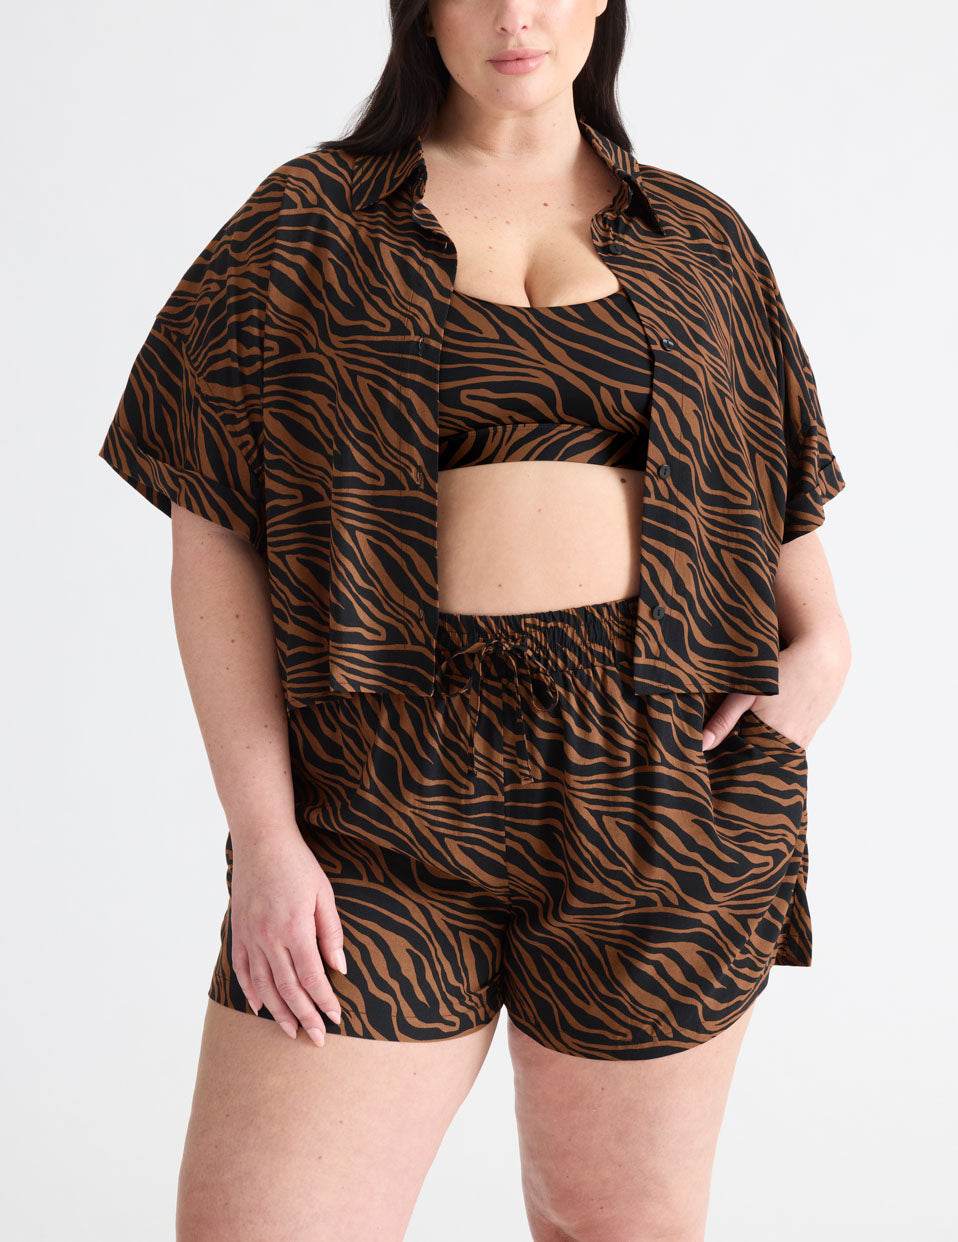 Gabrielle is a 38E and wears a Knix size XL